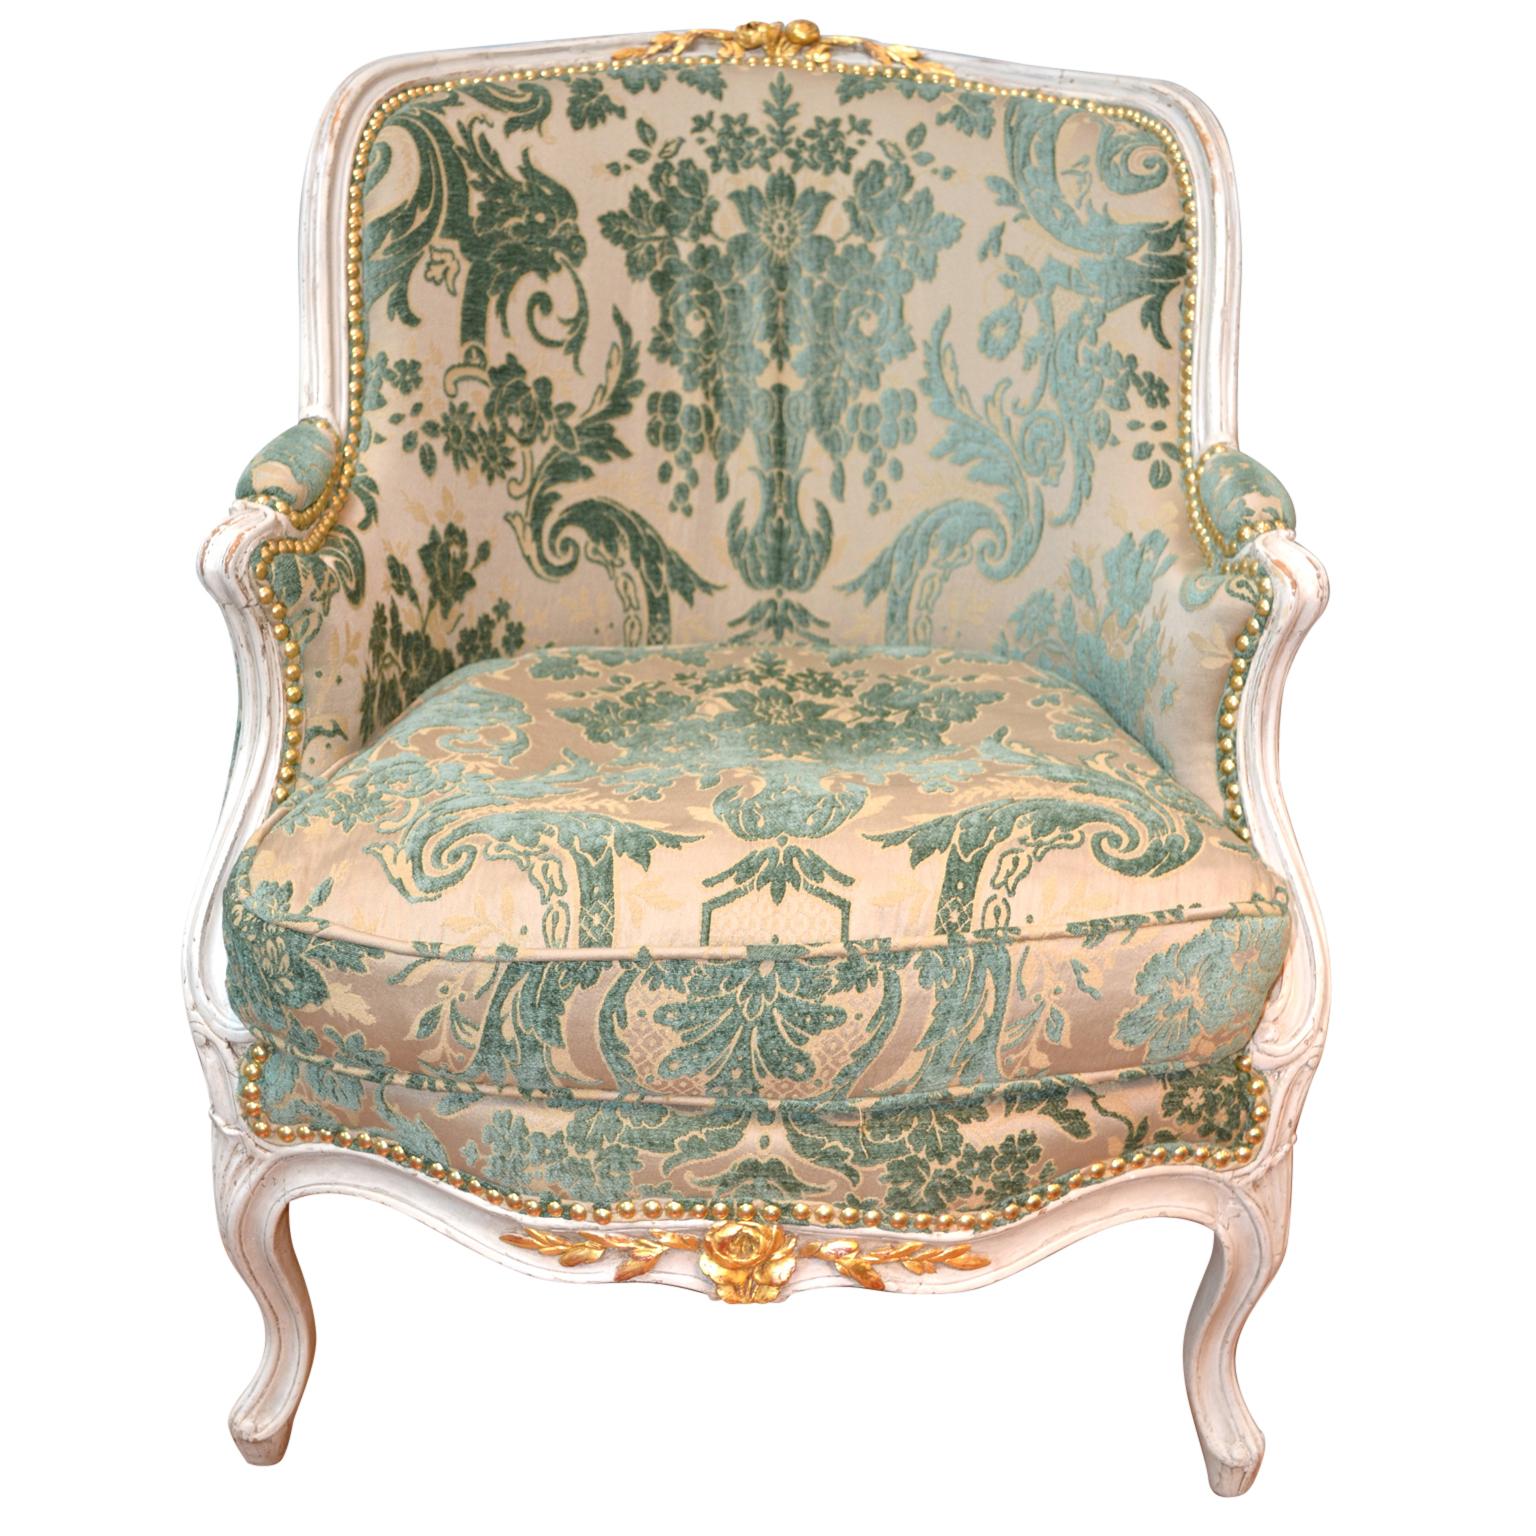 A period 18th century Louis XV upholstered armchair, the painted frame with water gilt highlights to the carved roses and leafs on the back rail and lower front. The chair is similar to chairs made by Gourdin who was one of the most important